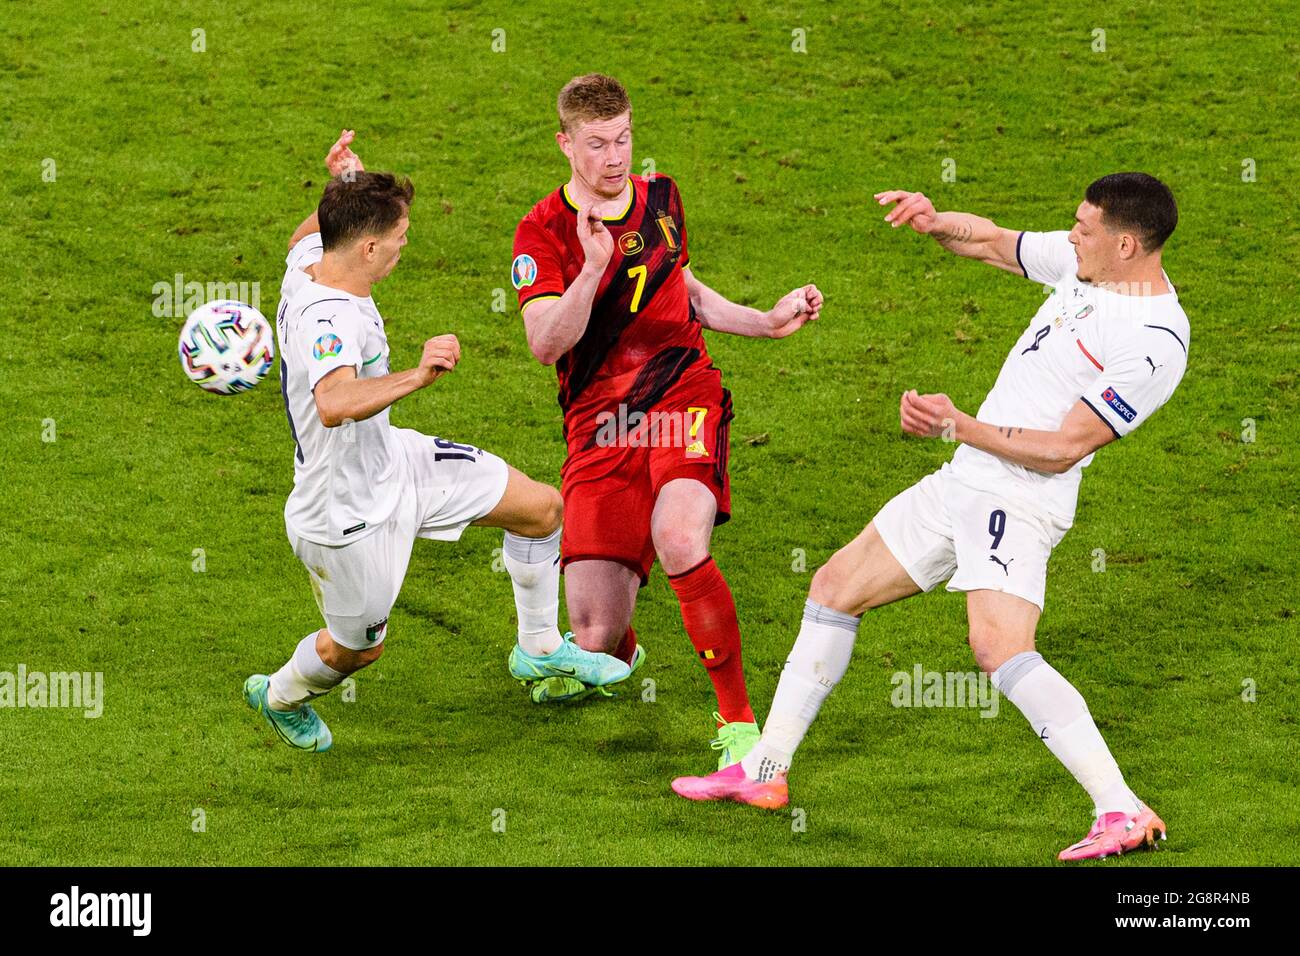 Munich, Germany - 02 July: Kevin De Bruyne of Belgium (C) battles for the ball with Andrea Belotti of Italy (R) during the UEFA Euro 2020 Championship Stock Photo